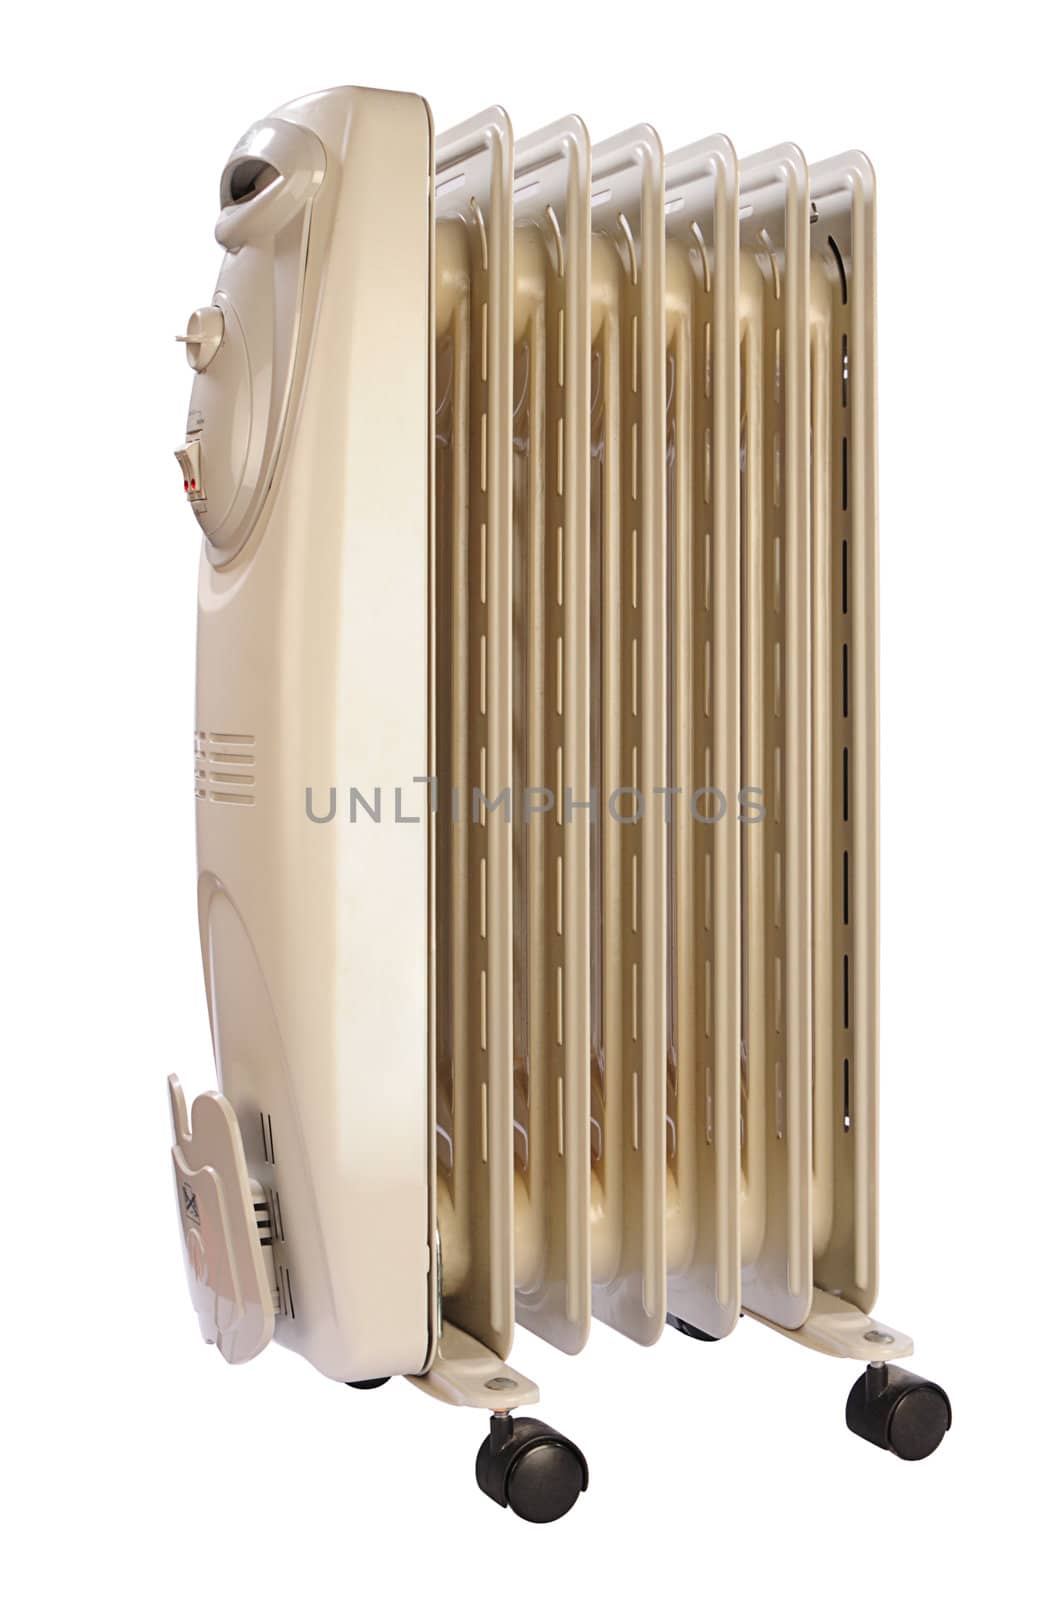 Electric oil heater with clipping path by dyoma